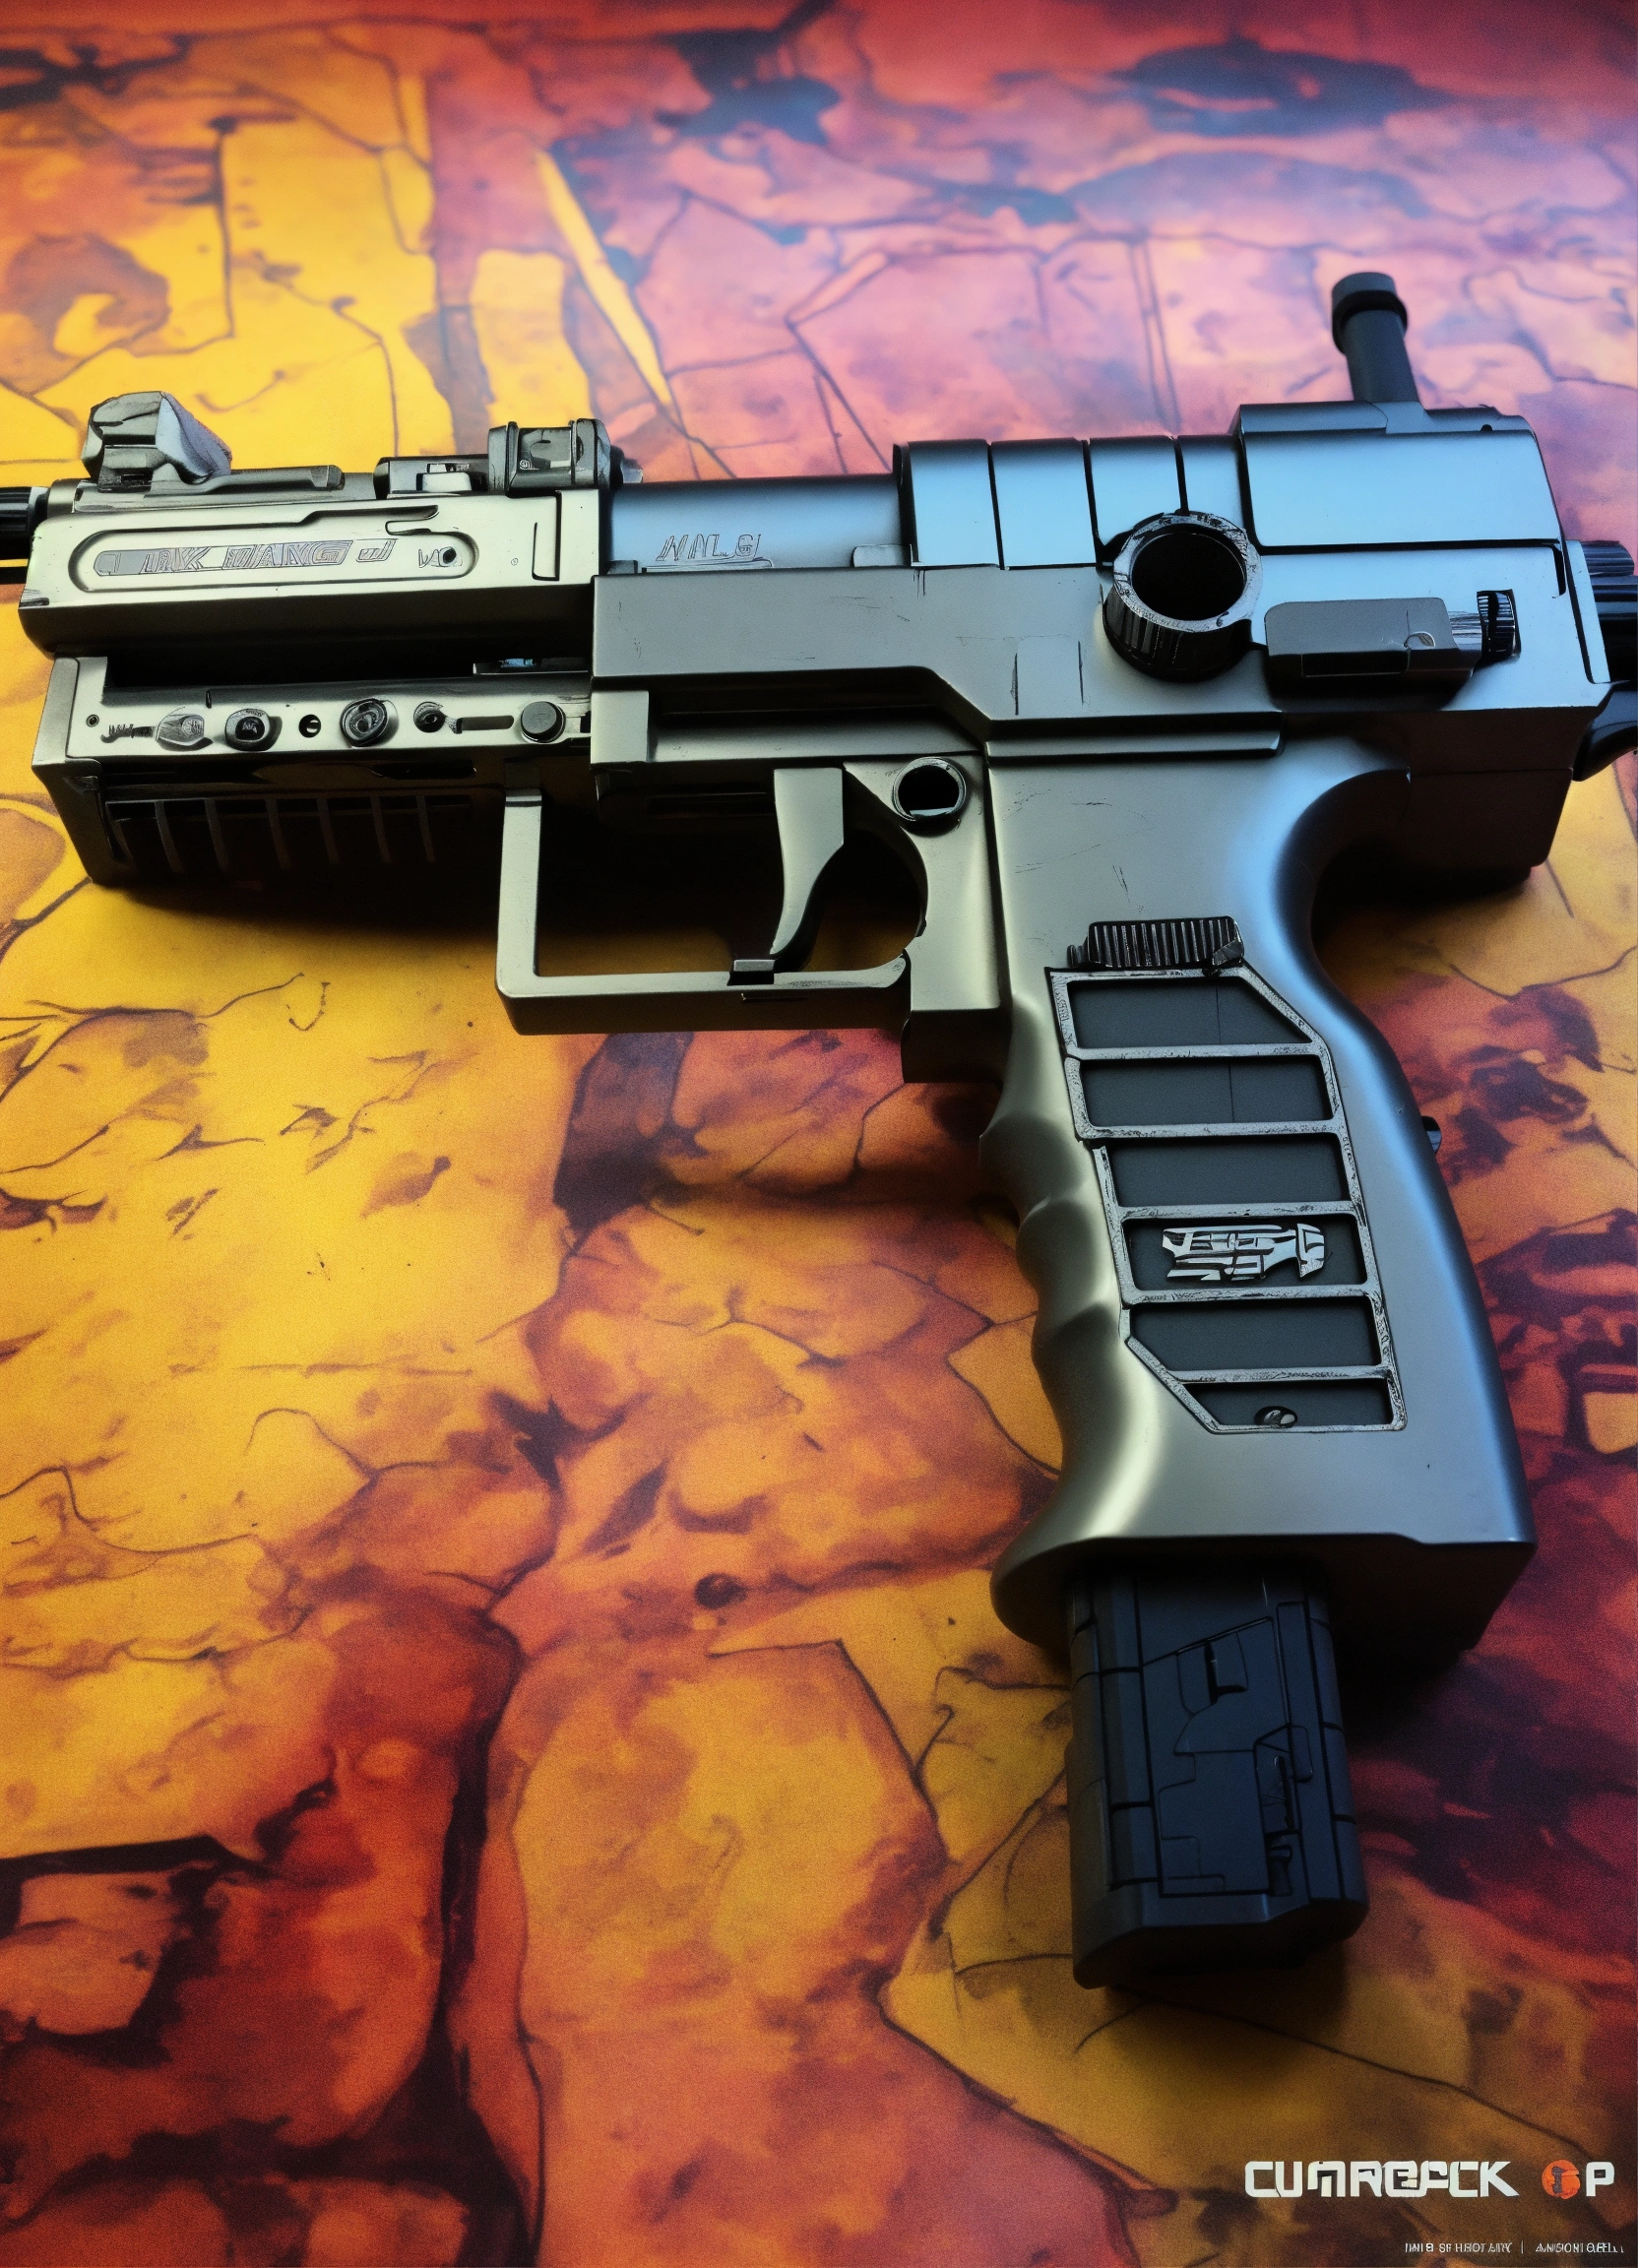 Uzi Pro Pistol: A Reliable and Accurate Firearm